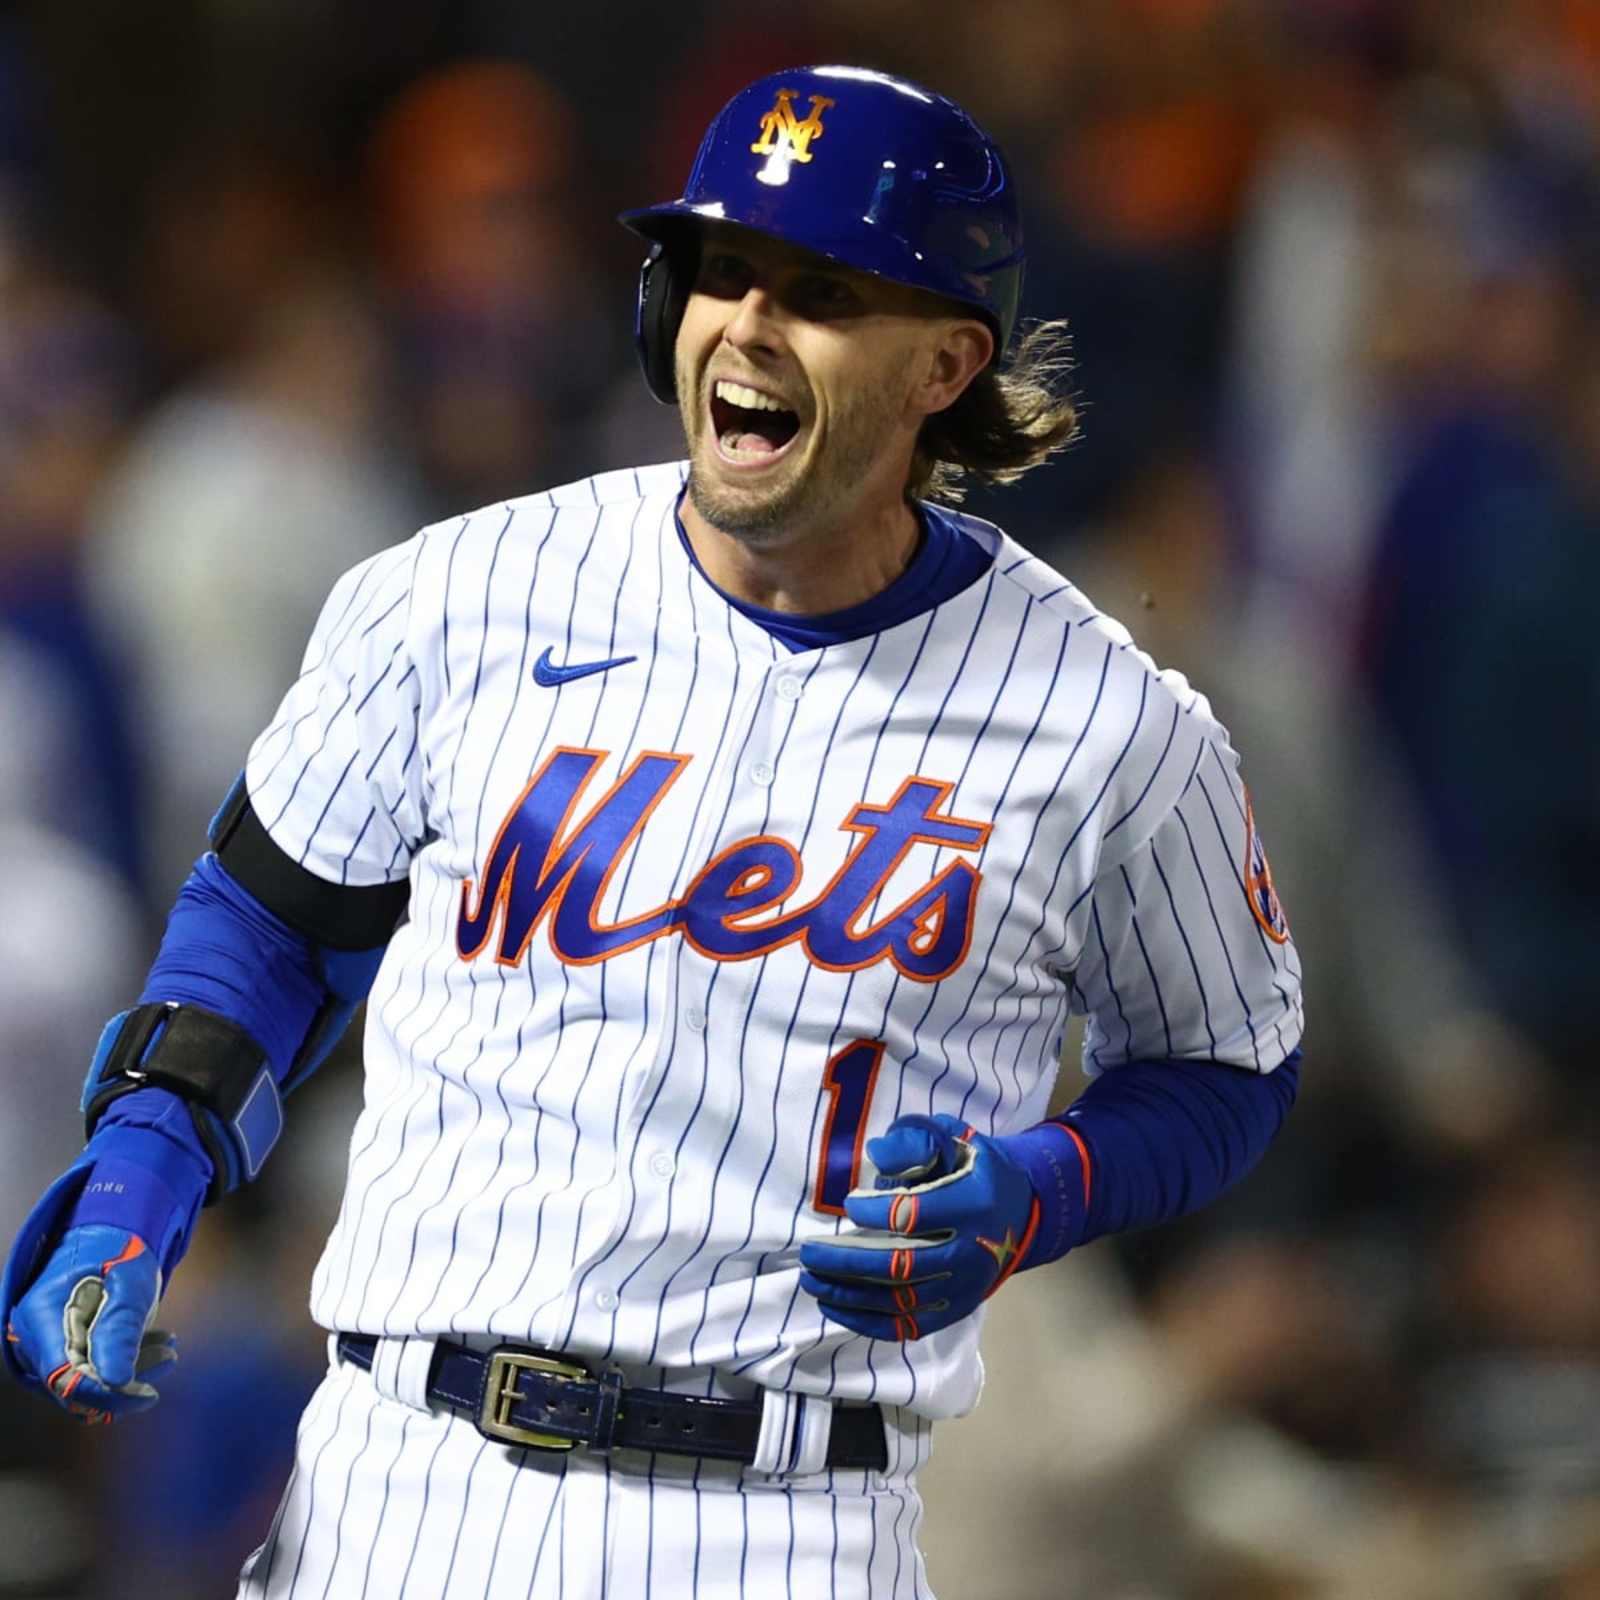 Sports digest: Mets, batting champ Jeff McNeil agree on 4-year deal